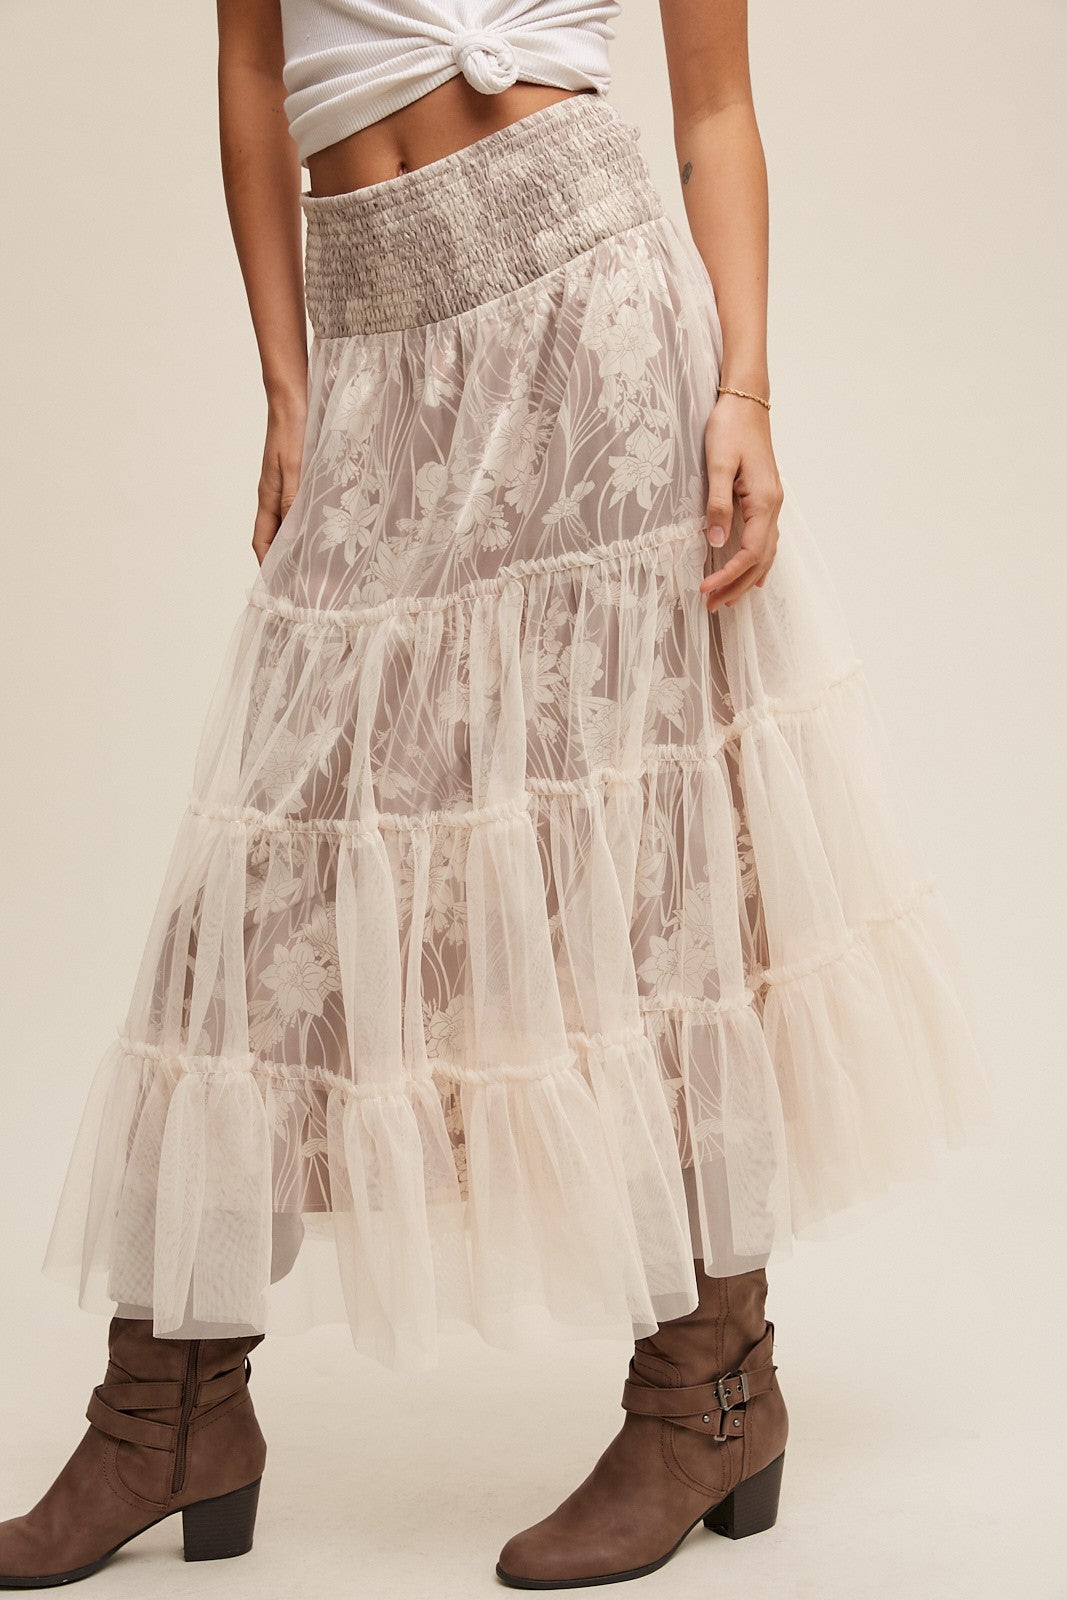 Floral Print with Tiered Mesh Skirt and Dress - Mocha